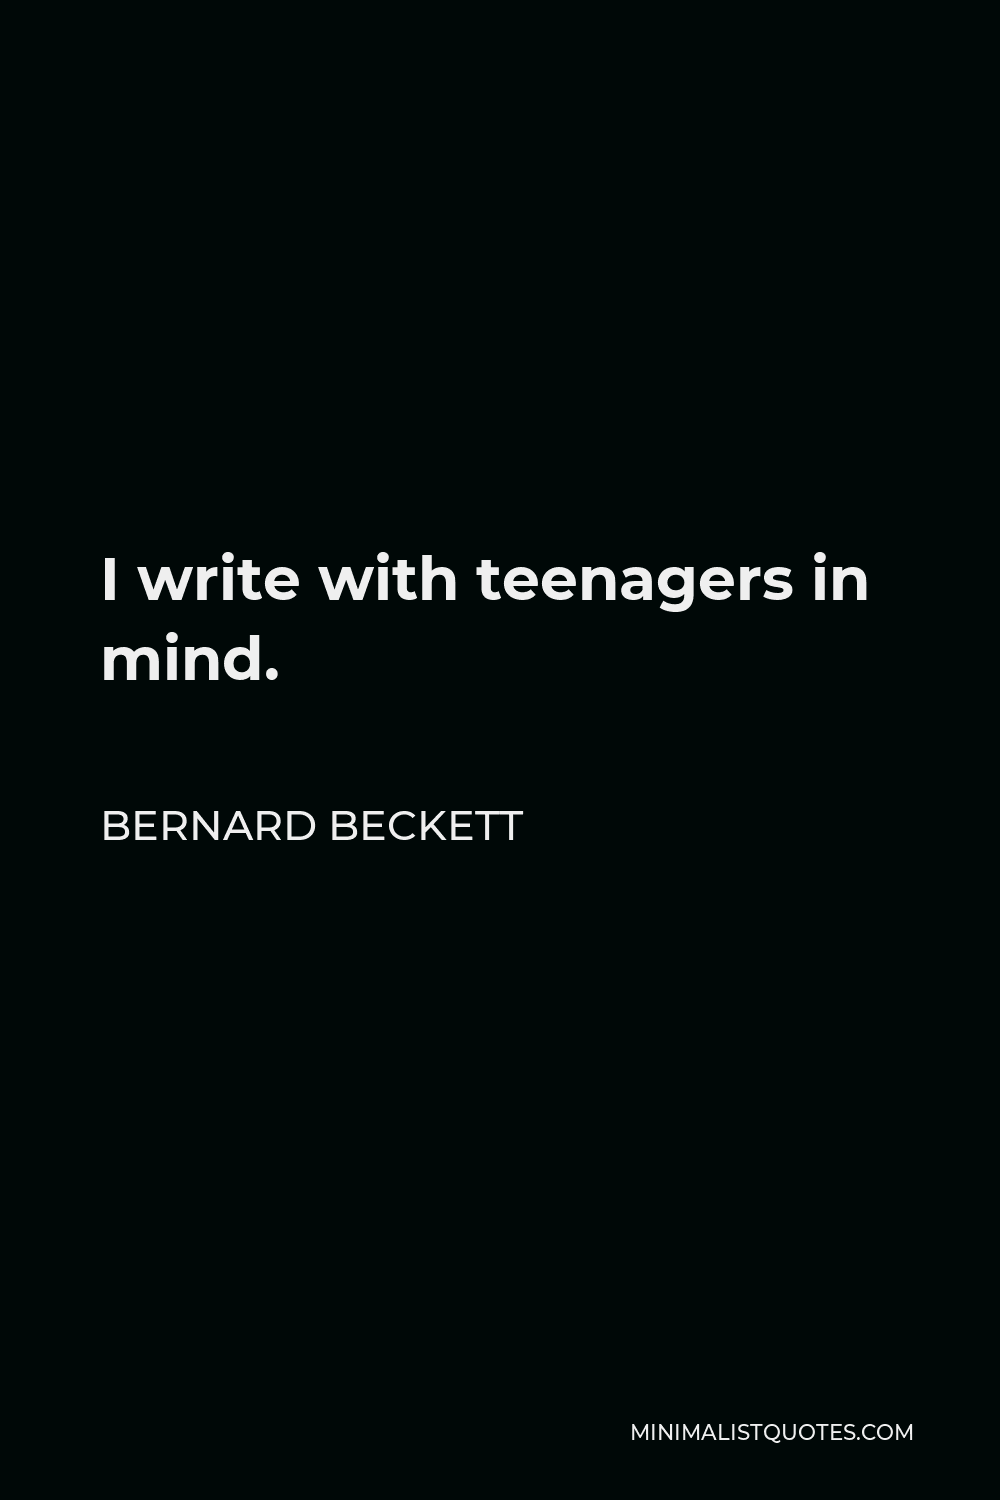 Bernard Beckett Quote - I write with teenagers in mind.